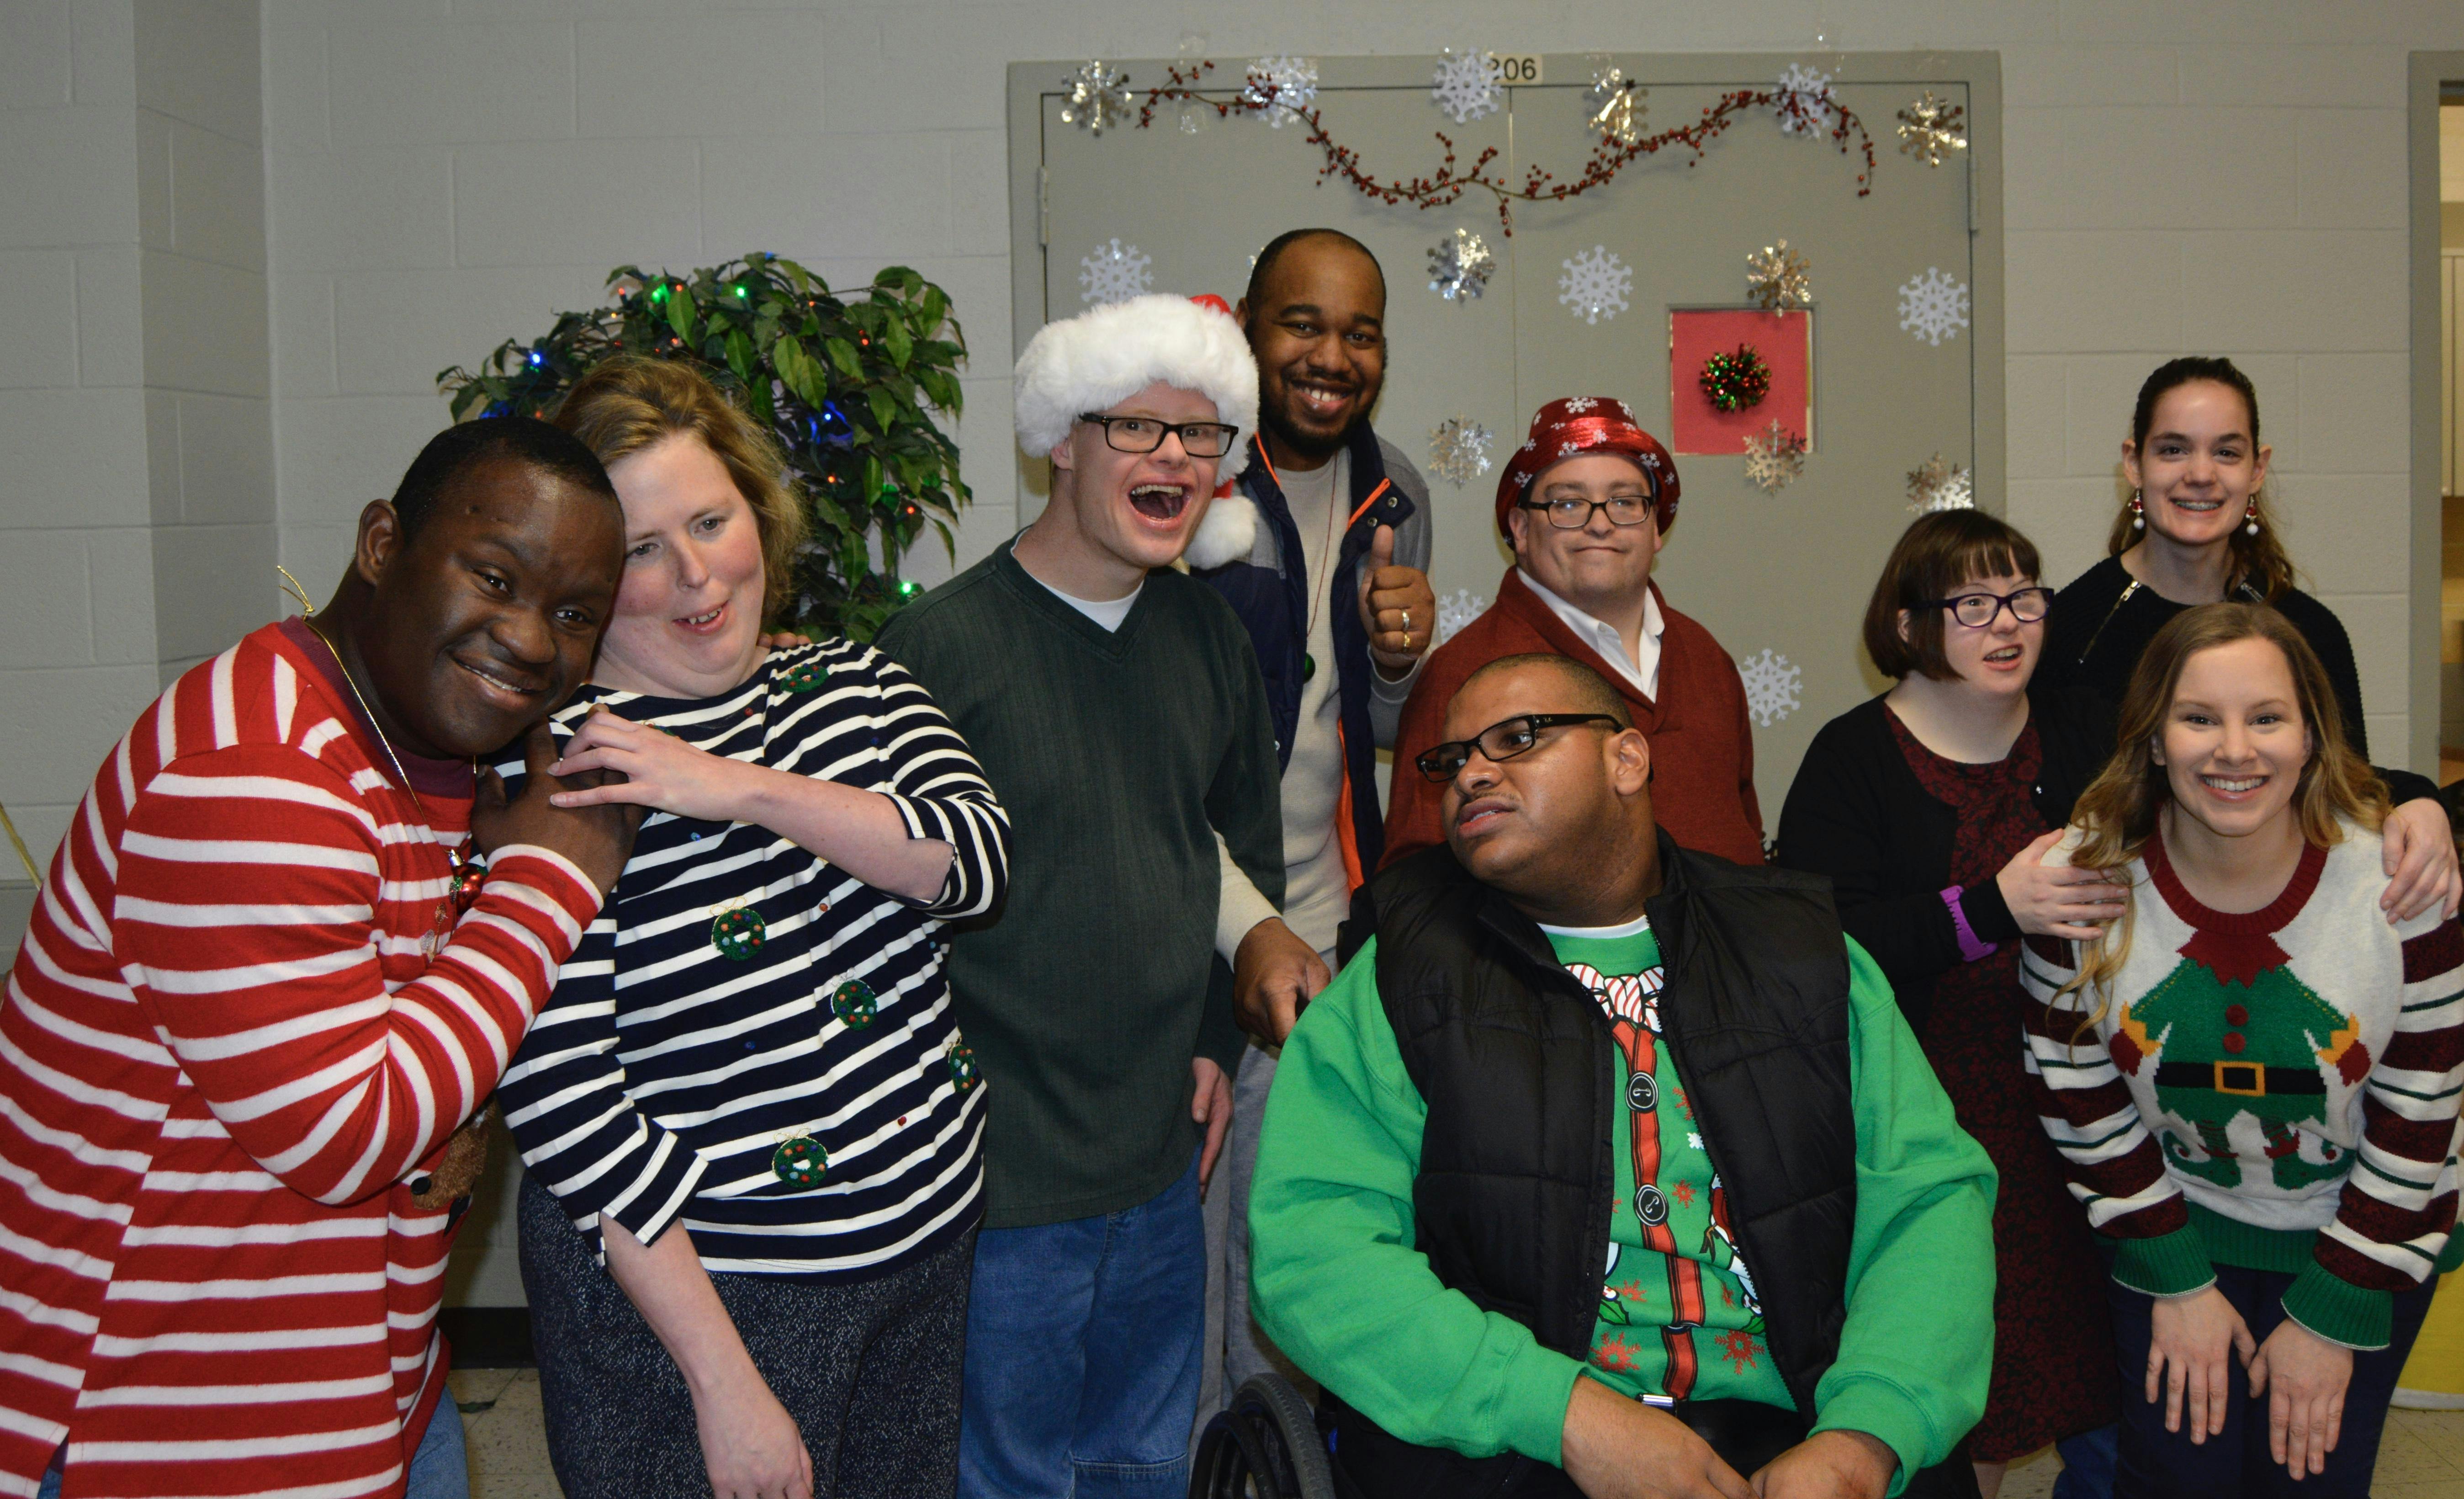 RESCHEDULED!! The Arc of Greensboro's 4th Annual Holiday Dinner and Dance Party